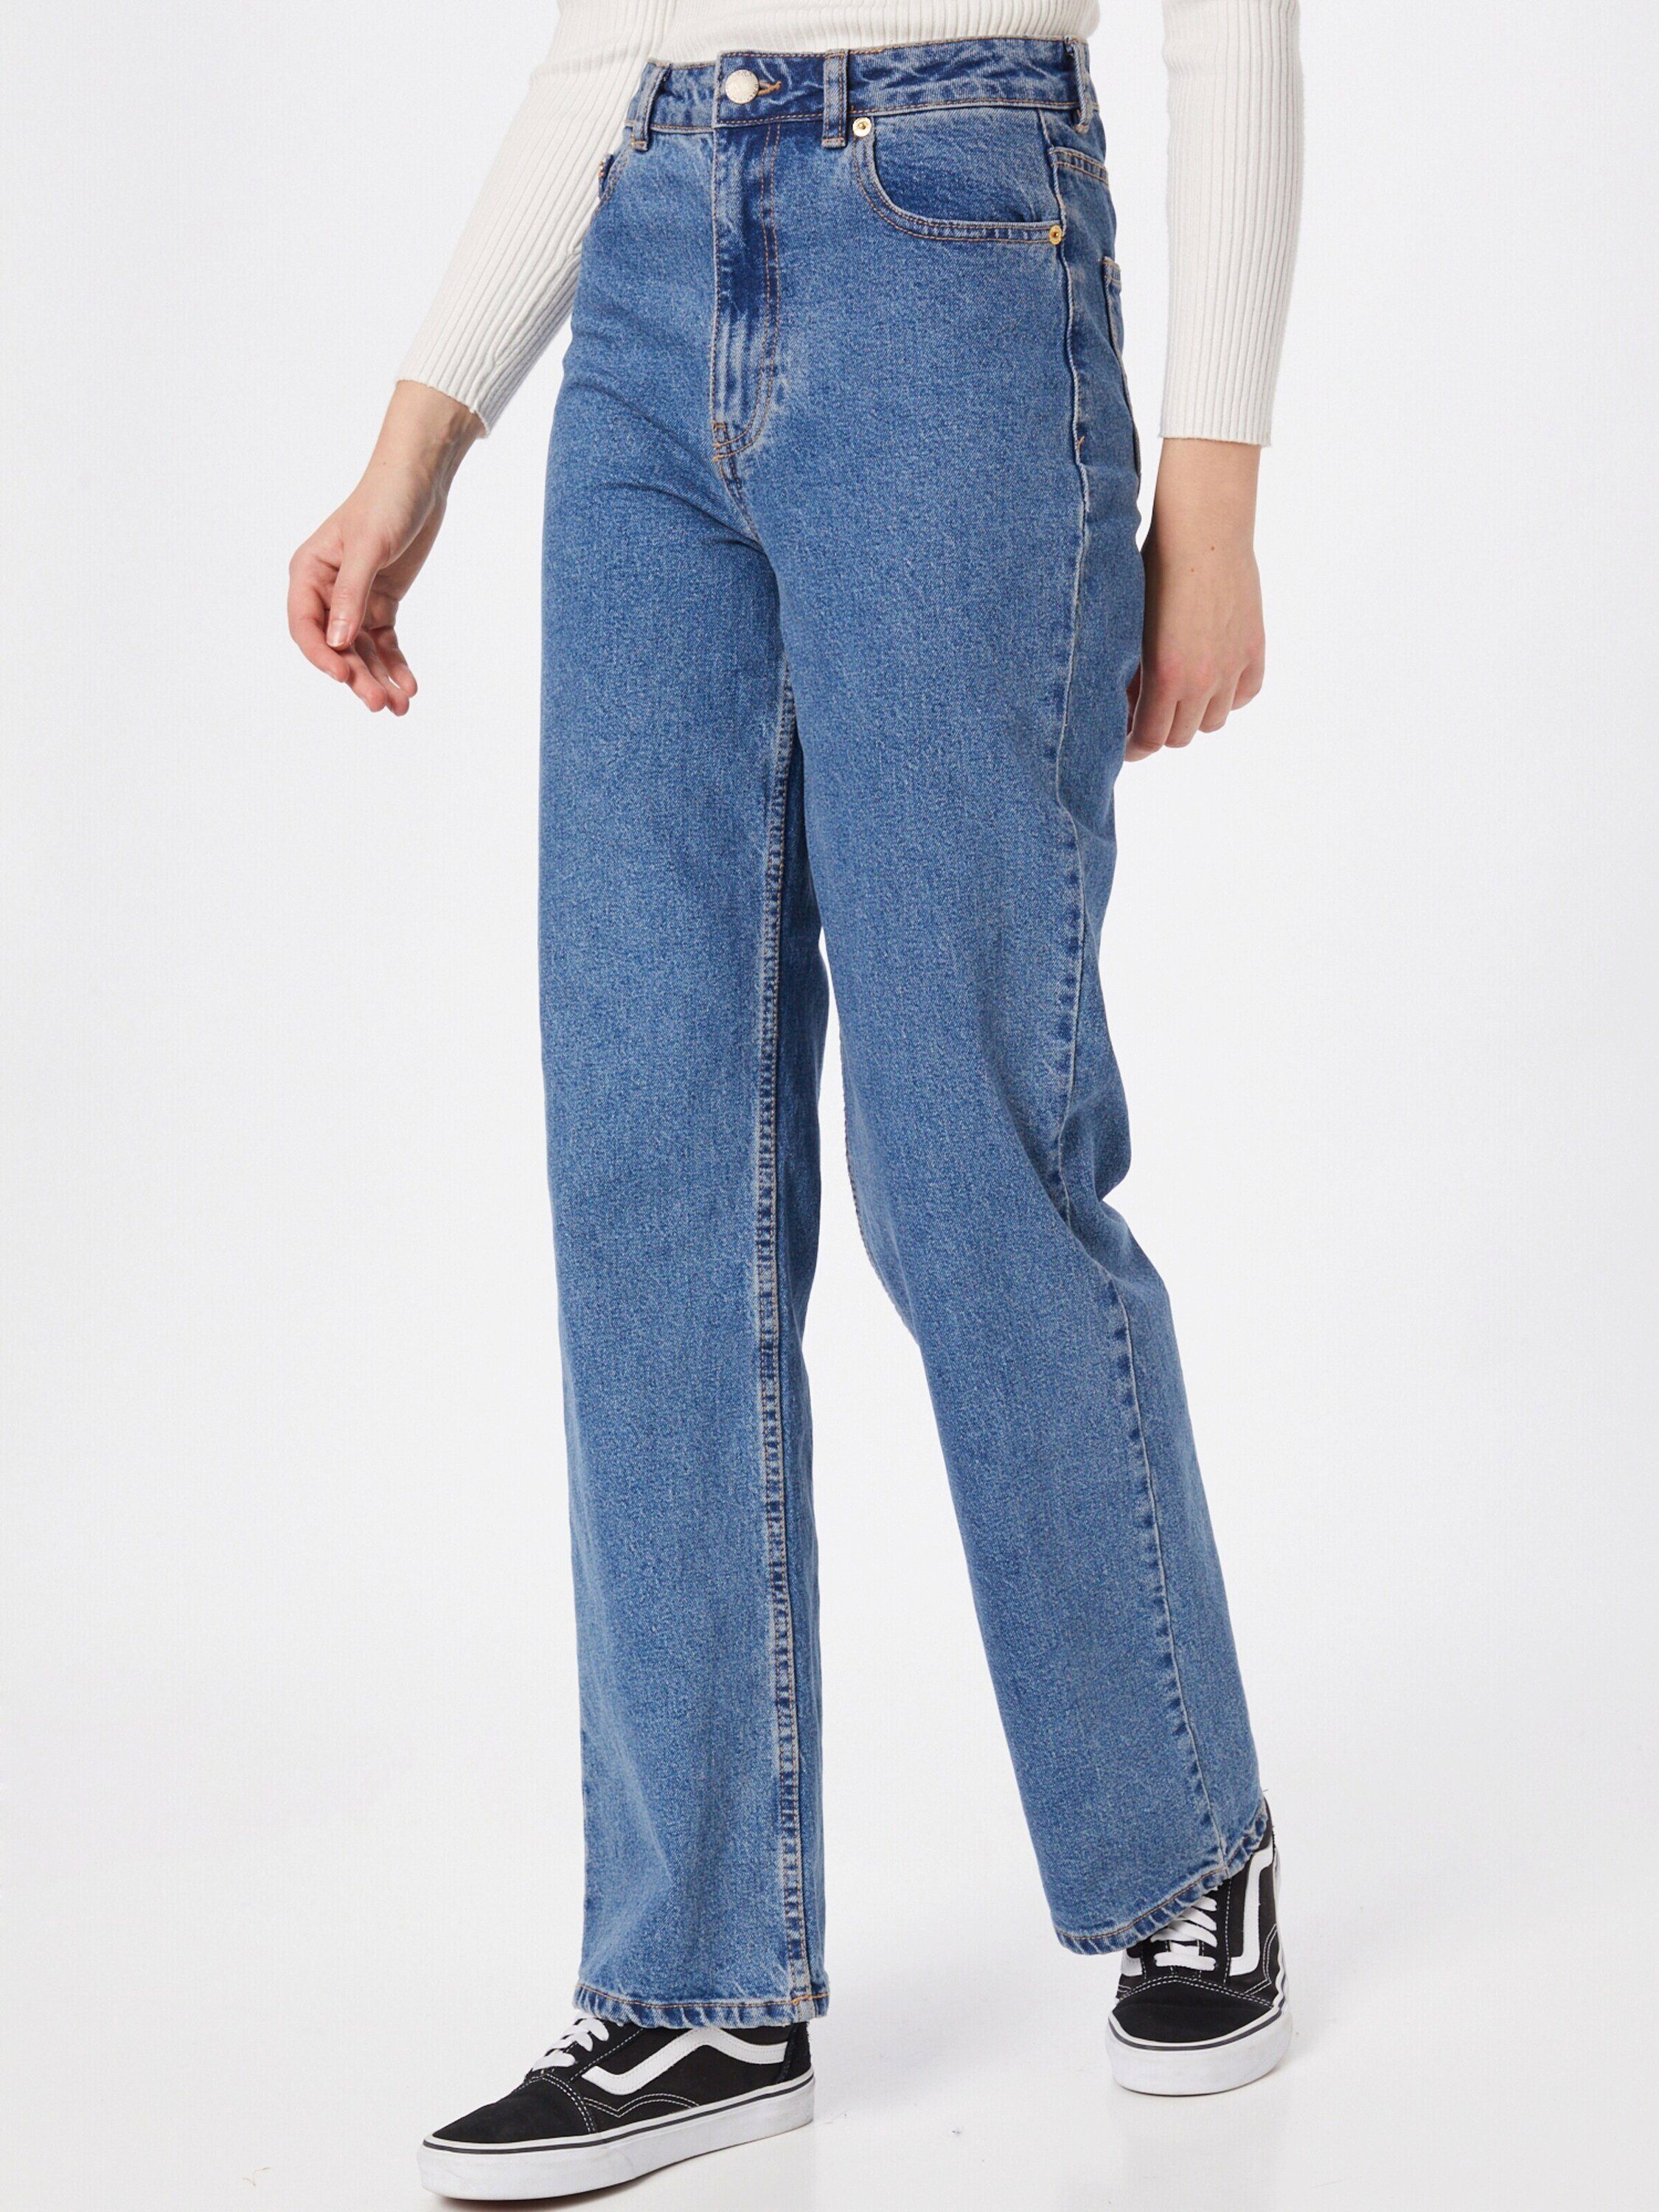 Plain/ohne Camille (1-tlg) Jeans Weiteres ONLY Detail Details, Weite